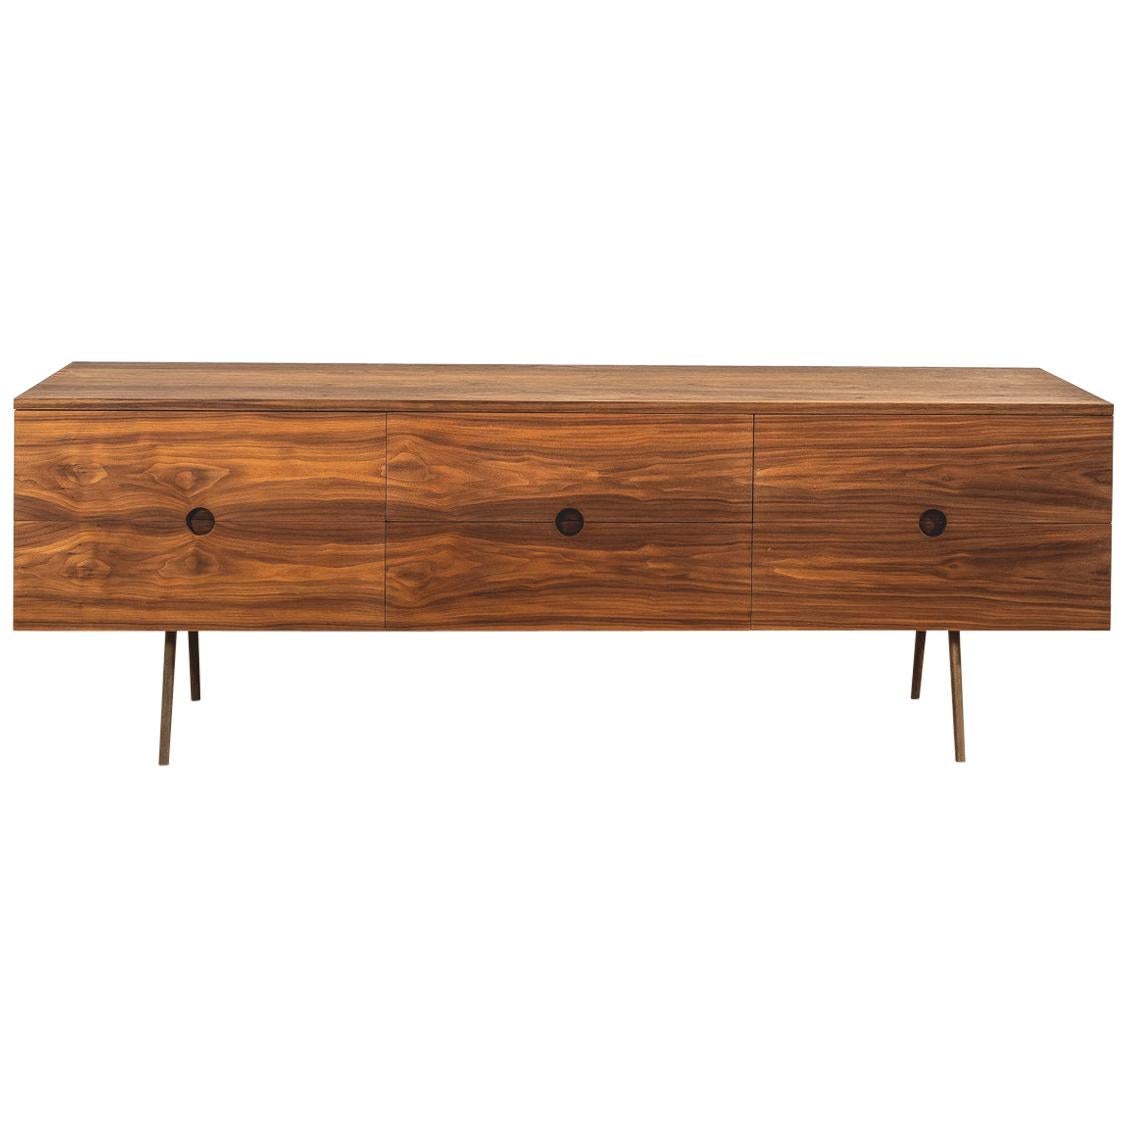 American Black Walnut Sideboard with Brass Underframe by Benchmark For Sale